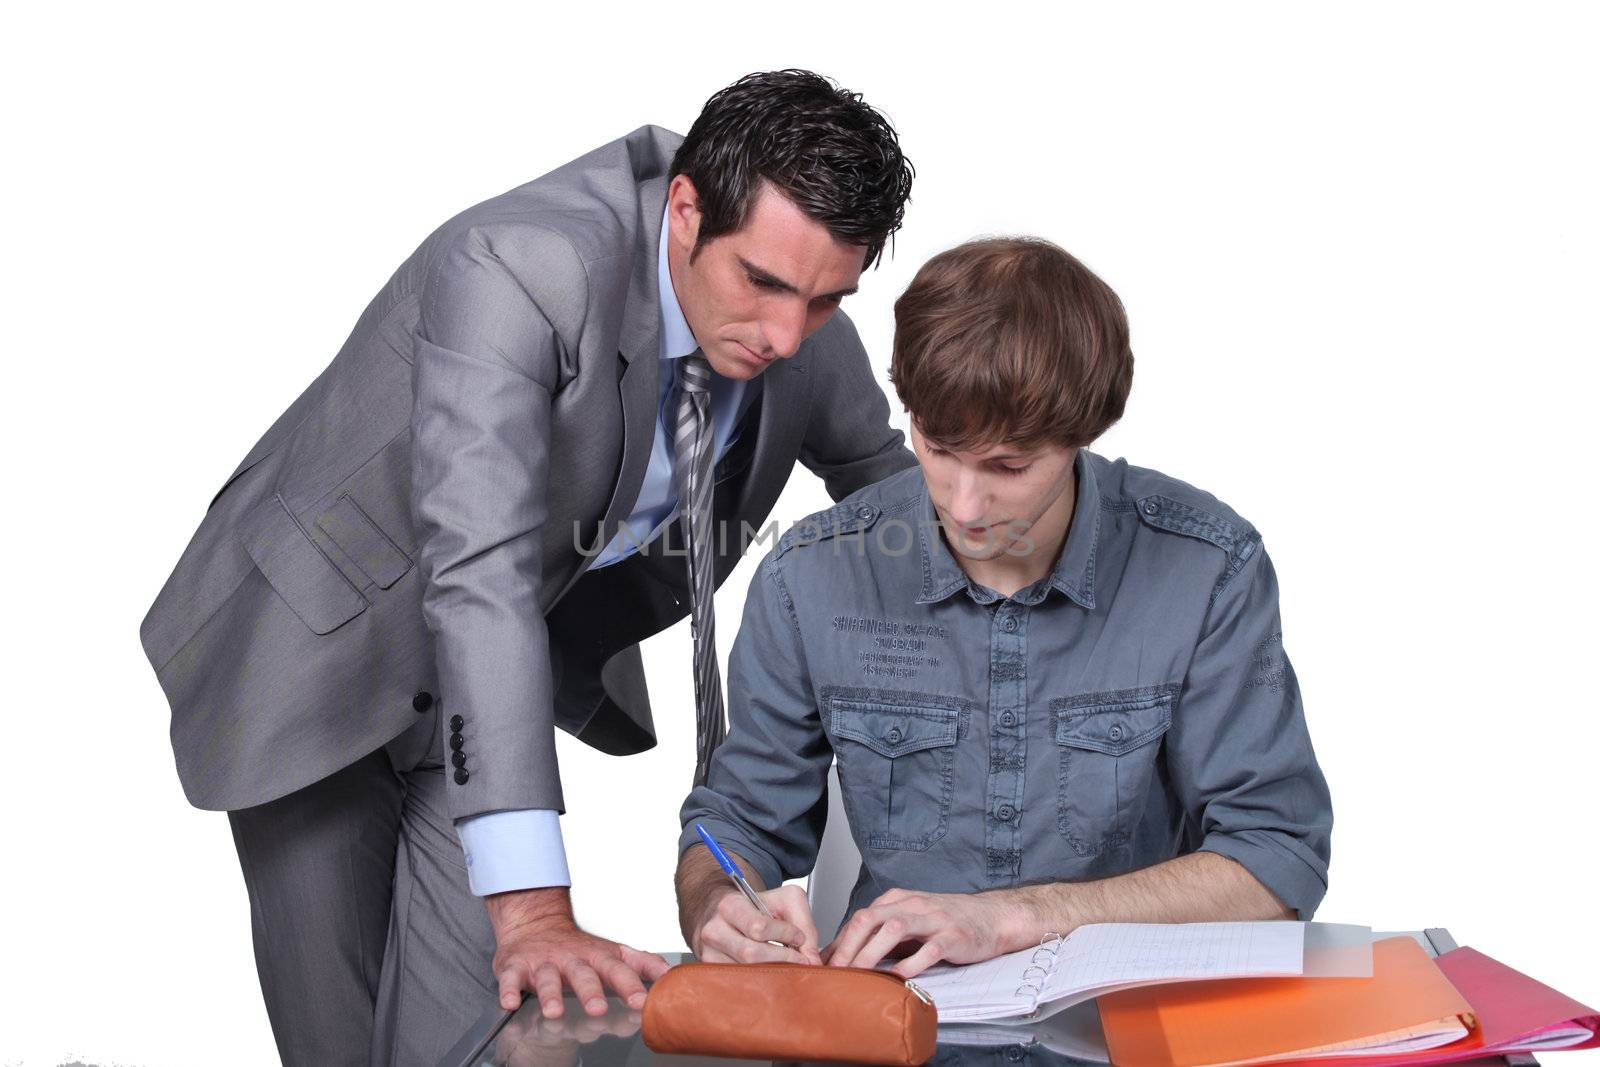 Teacher helping a student with his studies